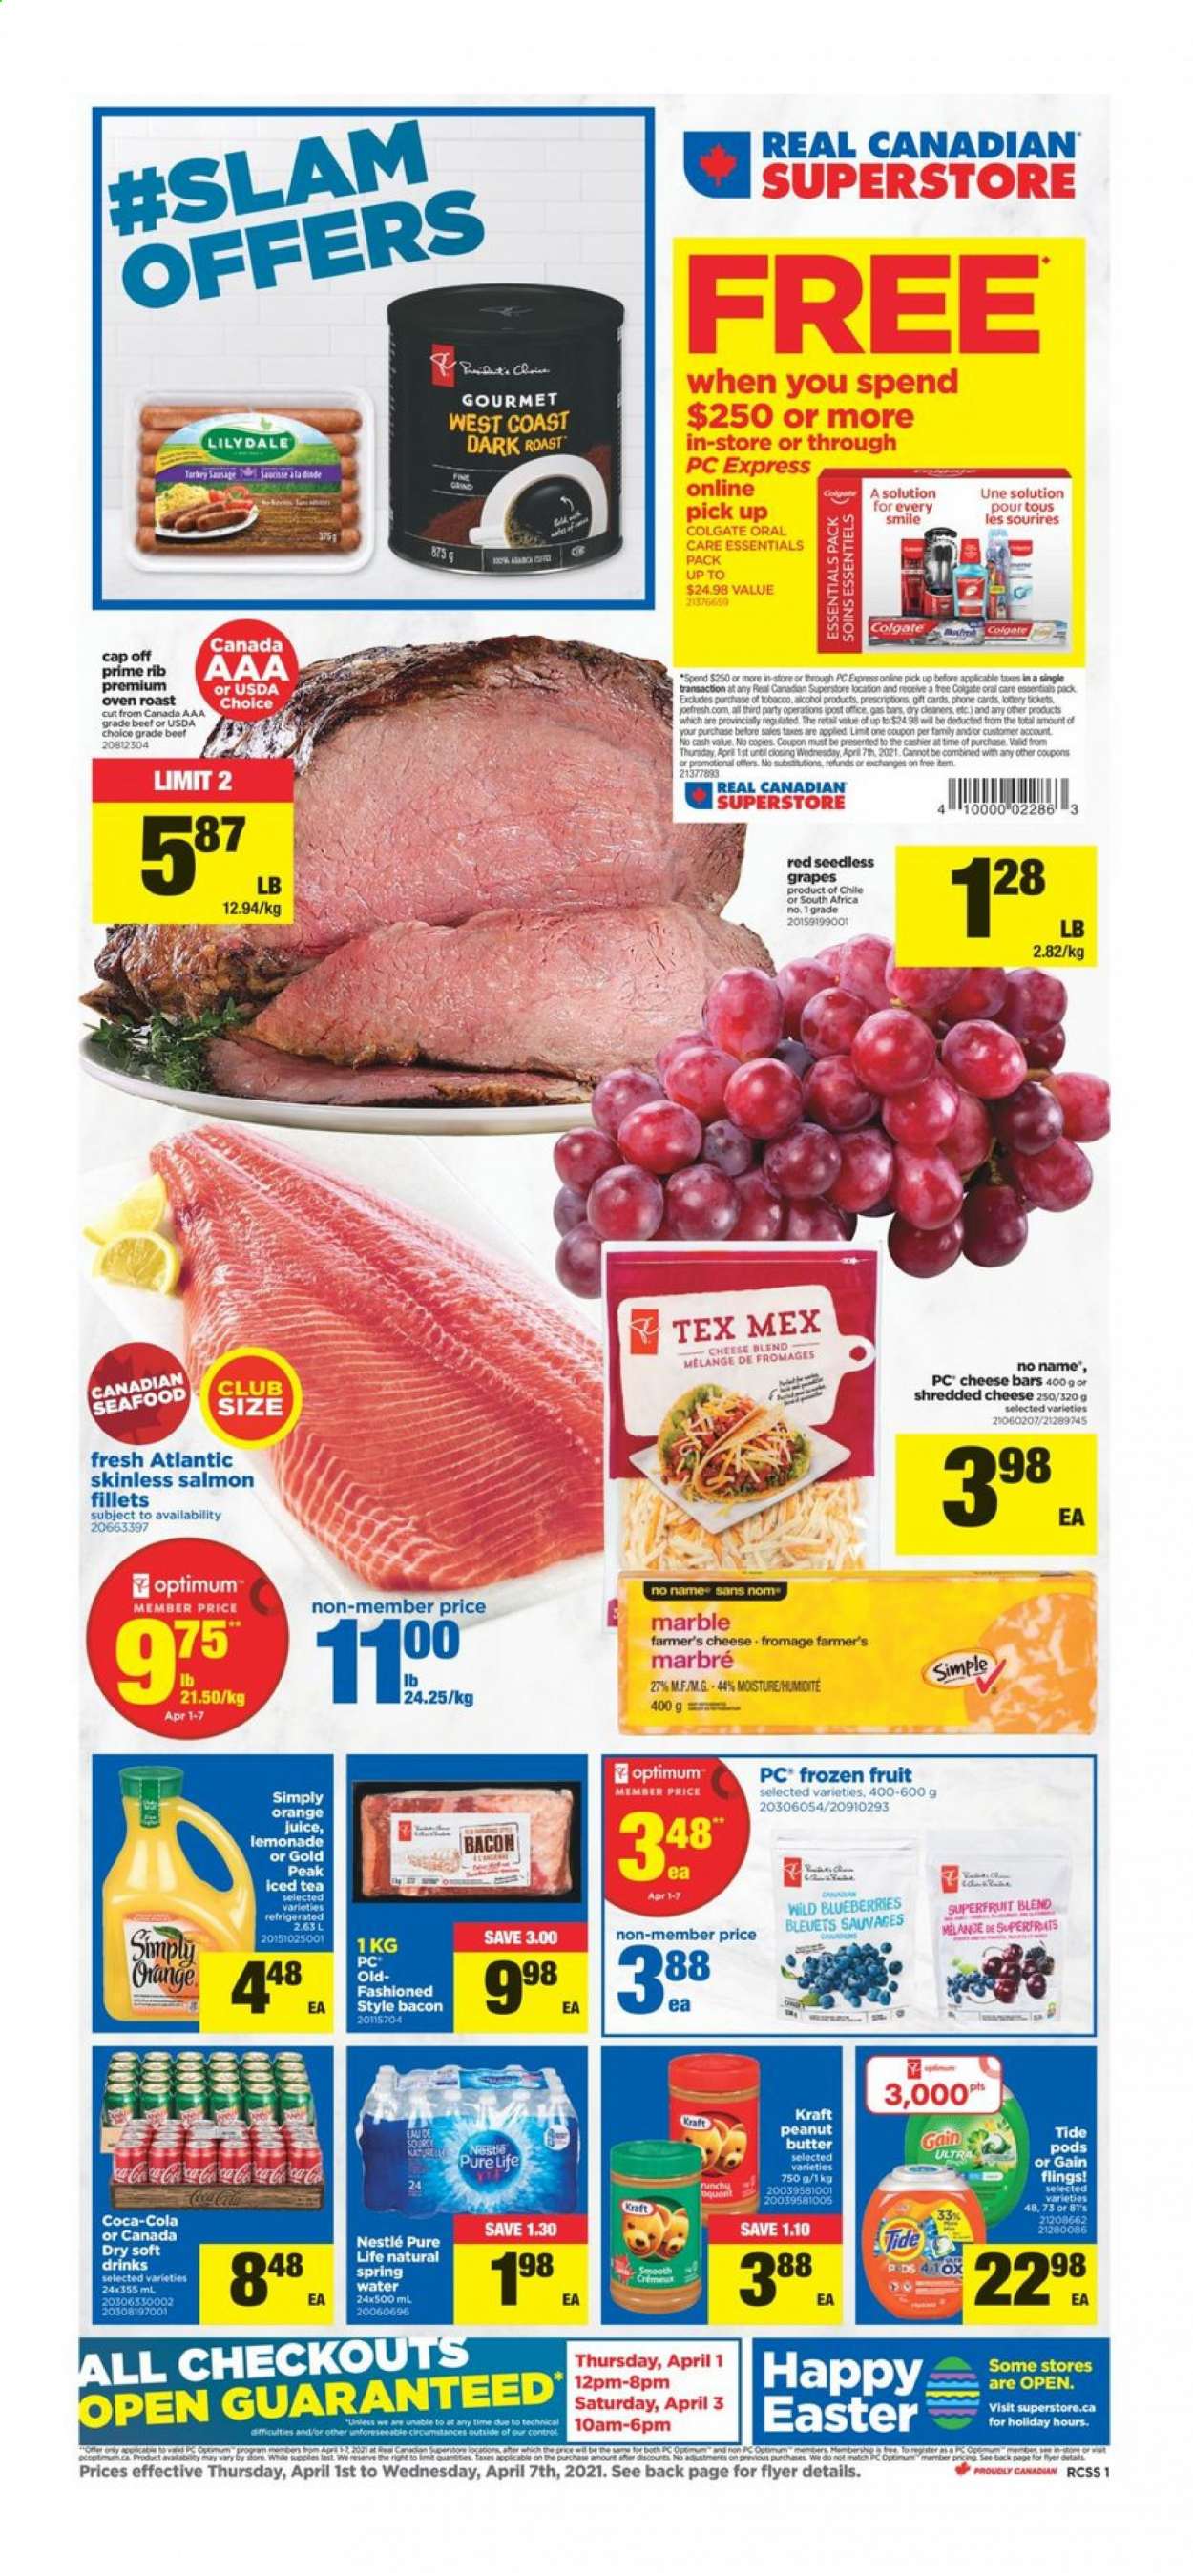 thumbnail - Real Canadian Superstore Flyer - April 01, 2021 - April 07, 2021 - Sales products - blueberries, grapes, salmon, salmon fillet, seafood, No Name, Kraft®, bacon, shredded cheese, peanut butter, Canada Dry, Coca-Cola, lemonade, orange juice, juice, ice tea, nappies, Gain, Tide, Optimum, Nestlé. Page 1.